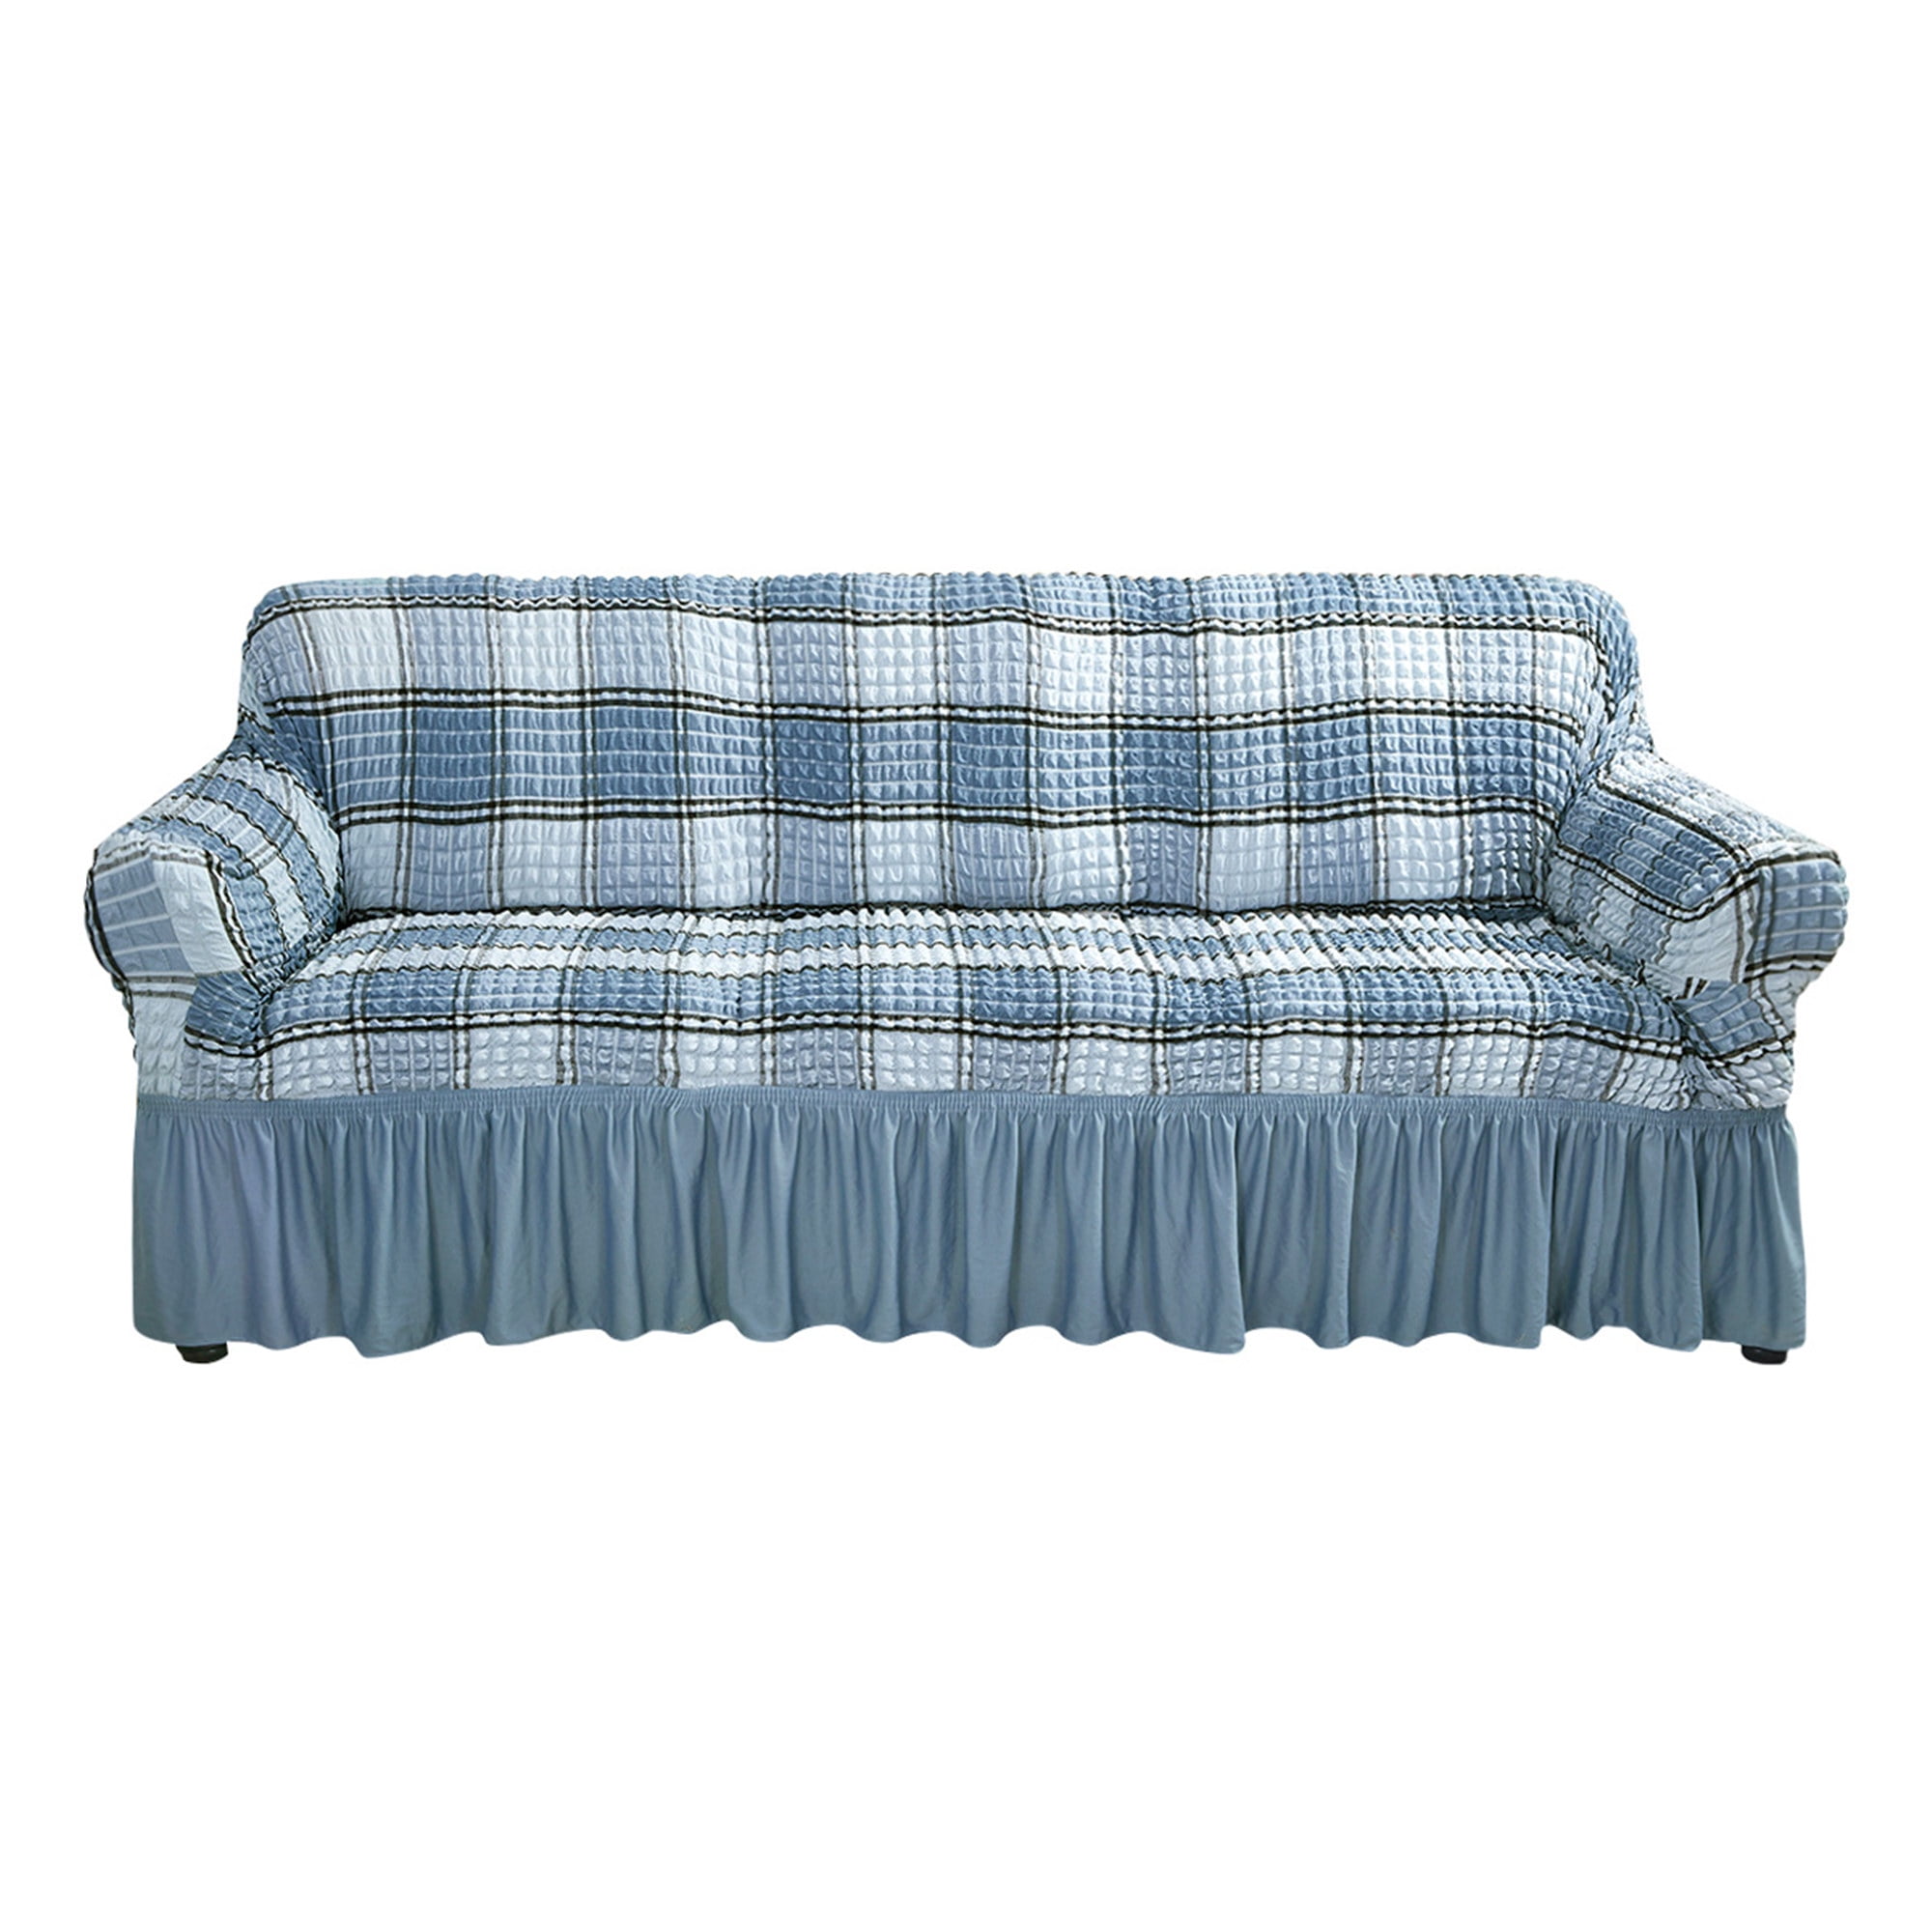 ANMINY Stretchy Sofa Slipcover Plaid Pleated Ruffled Skirt Loveseat Couch Cover